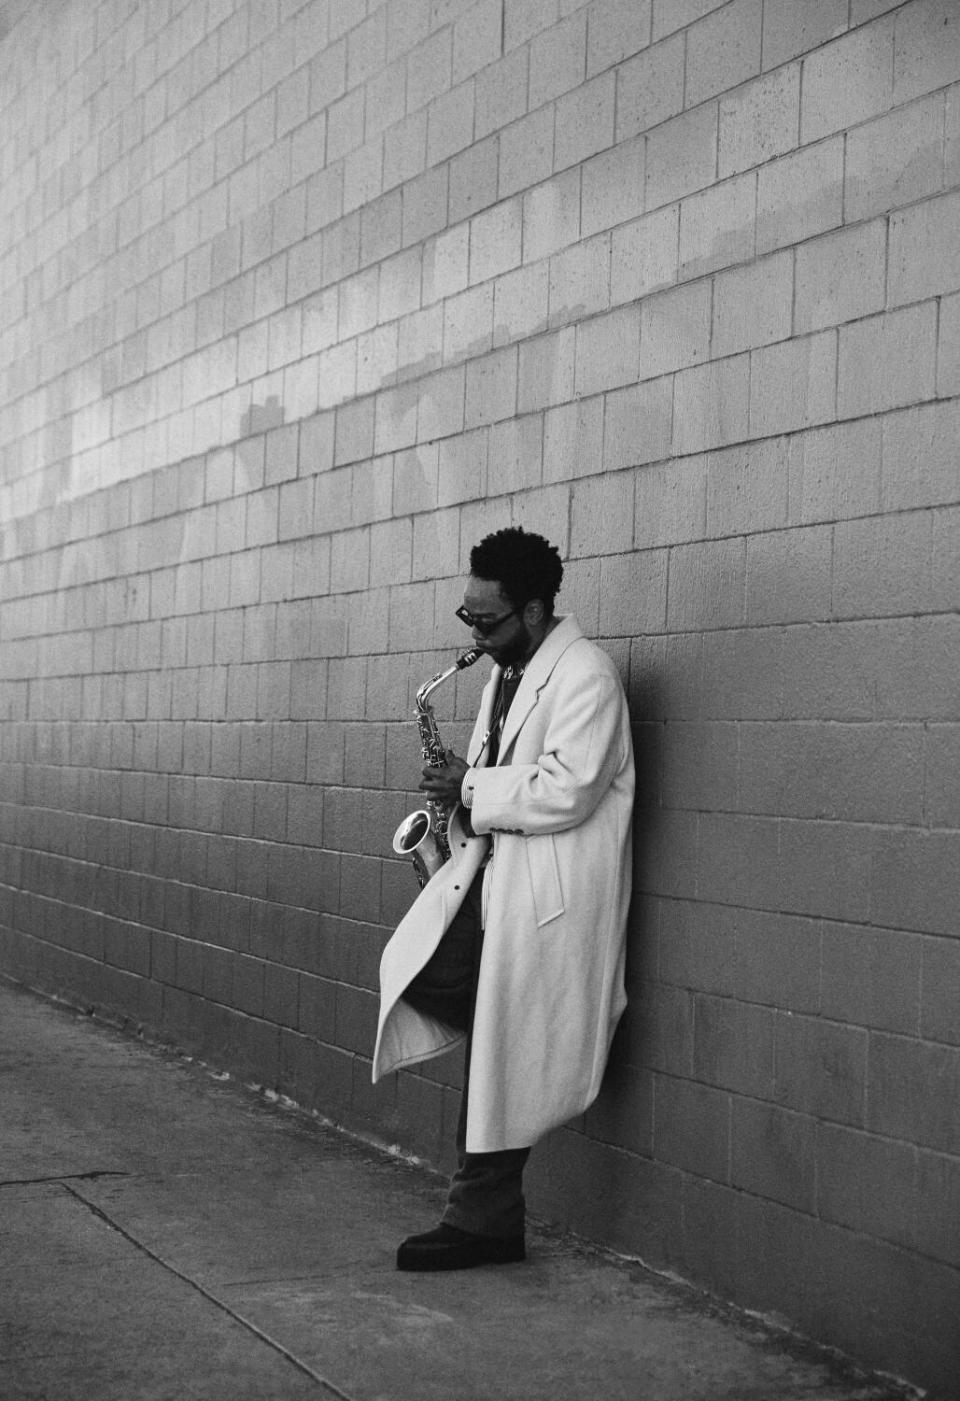 Terrace Martin plays the saxophone as he leans against a cement-block wall in a black-and-white photo.